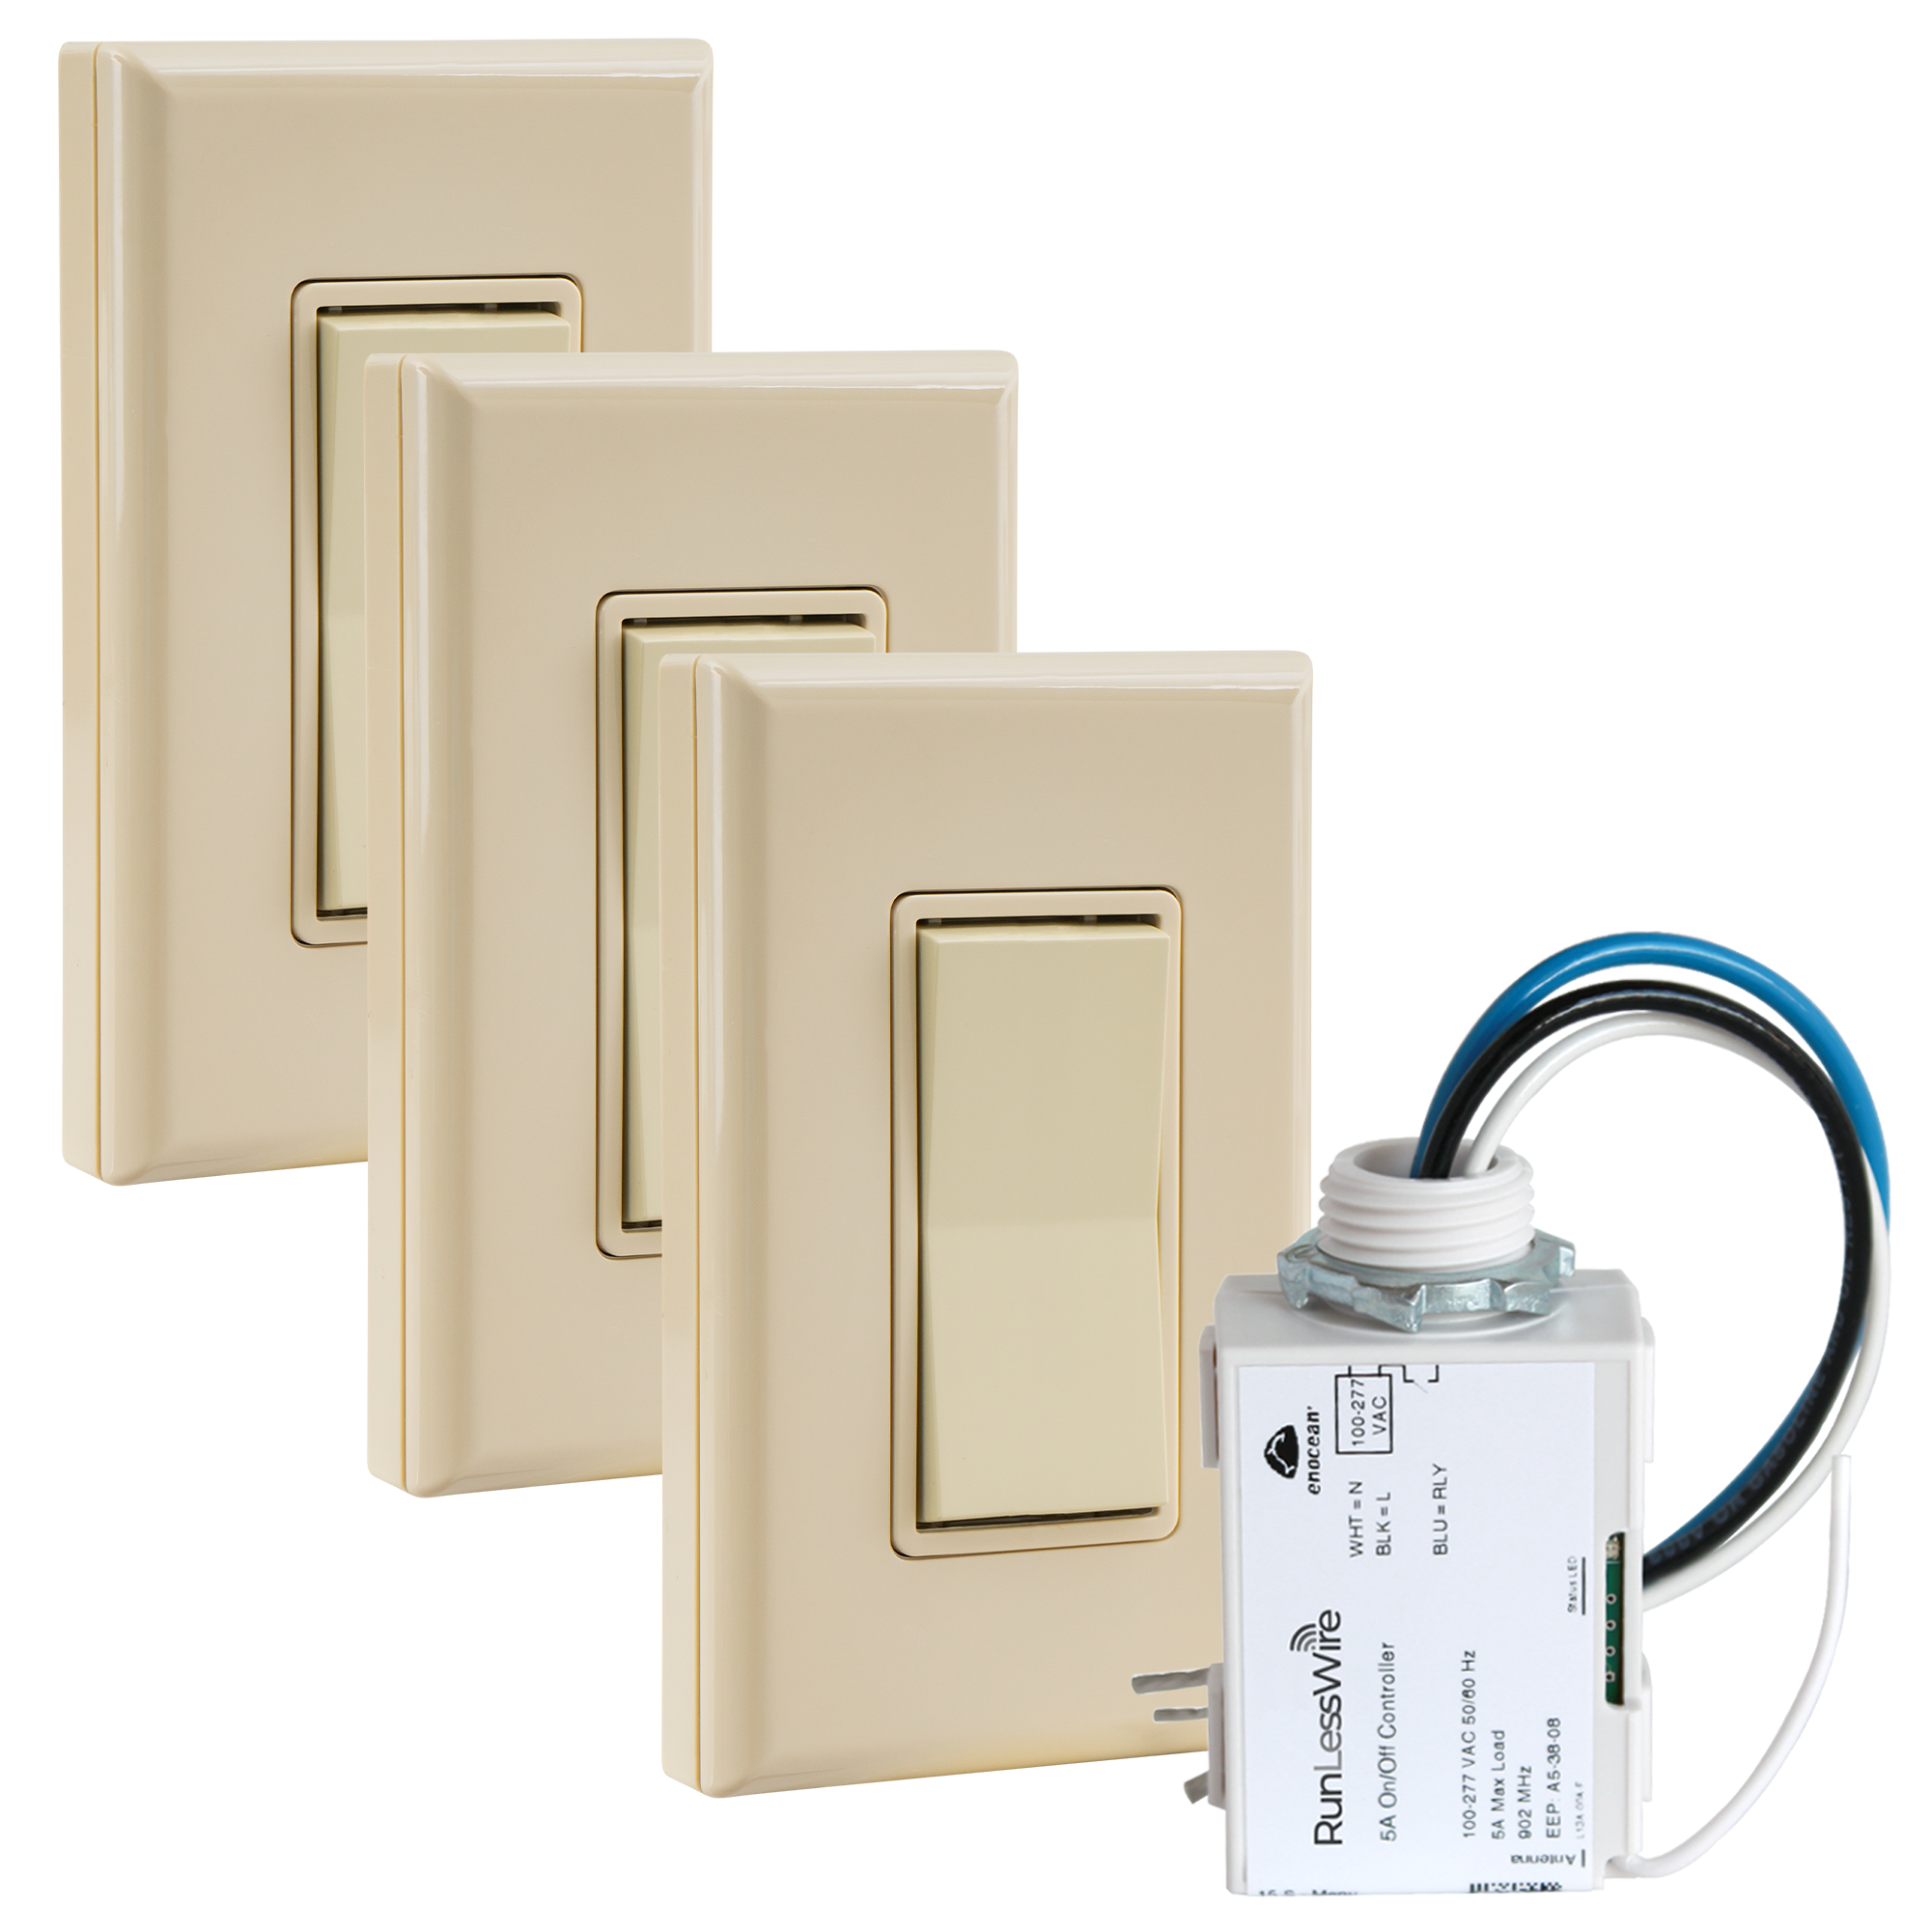 4-way Wireless Light Switch Kit – 1 Controller, 3 Light Switches